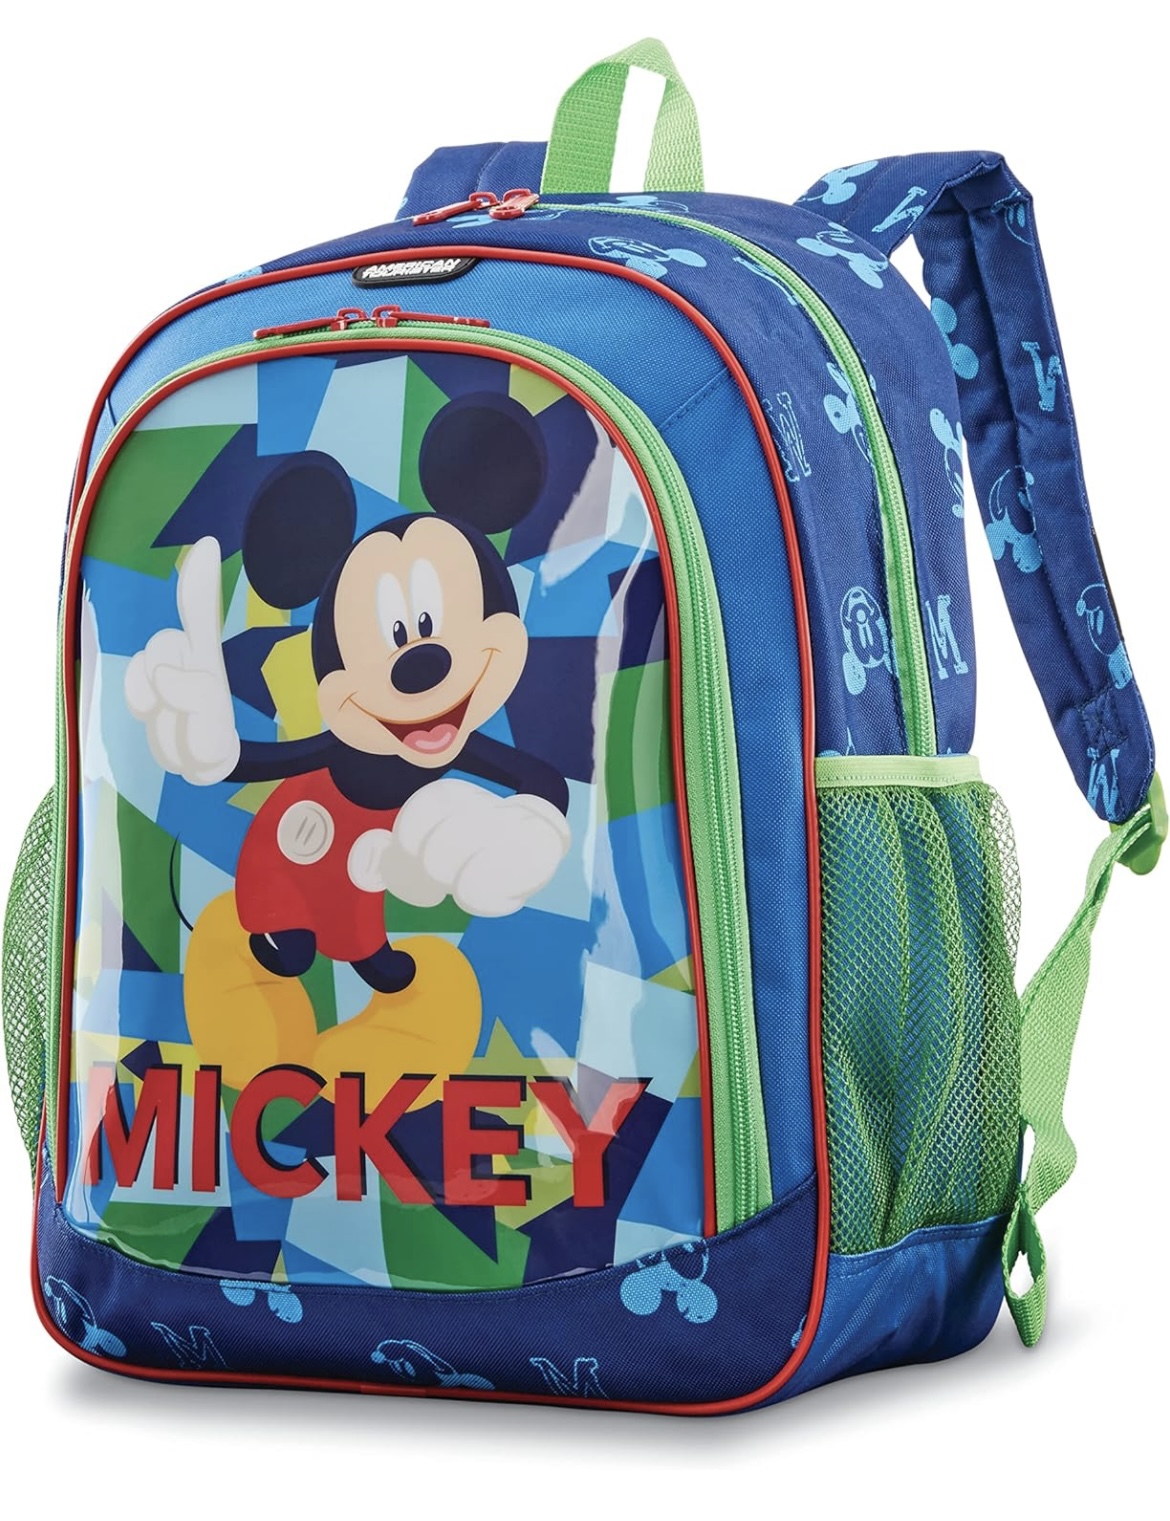 American Tourister Bag for Kids Mickey Mouse